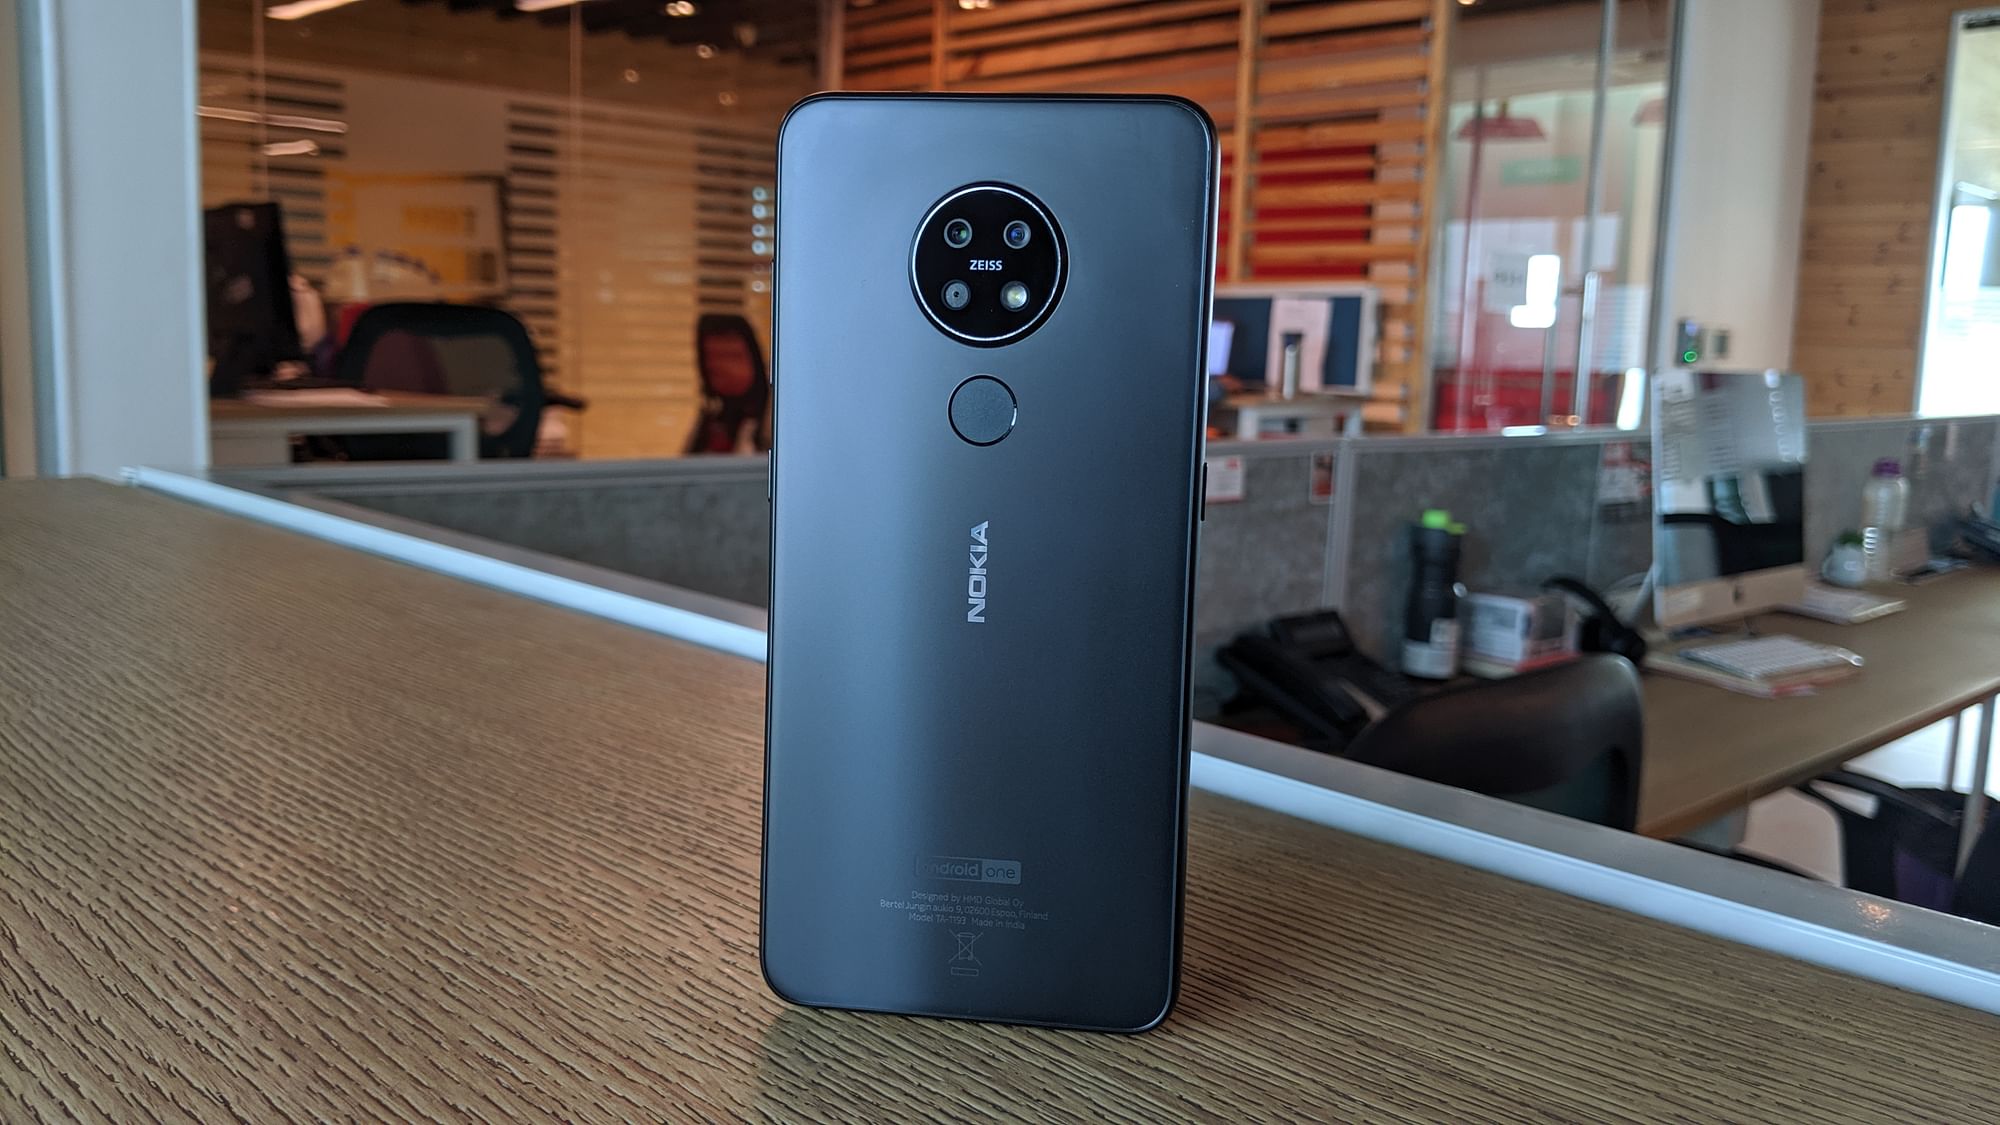 Should you buy this Nokia phone?